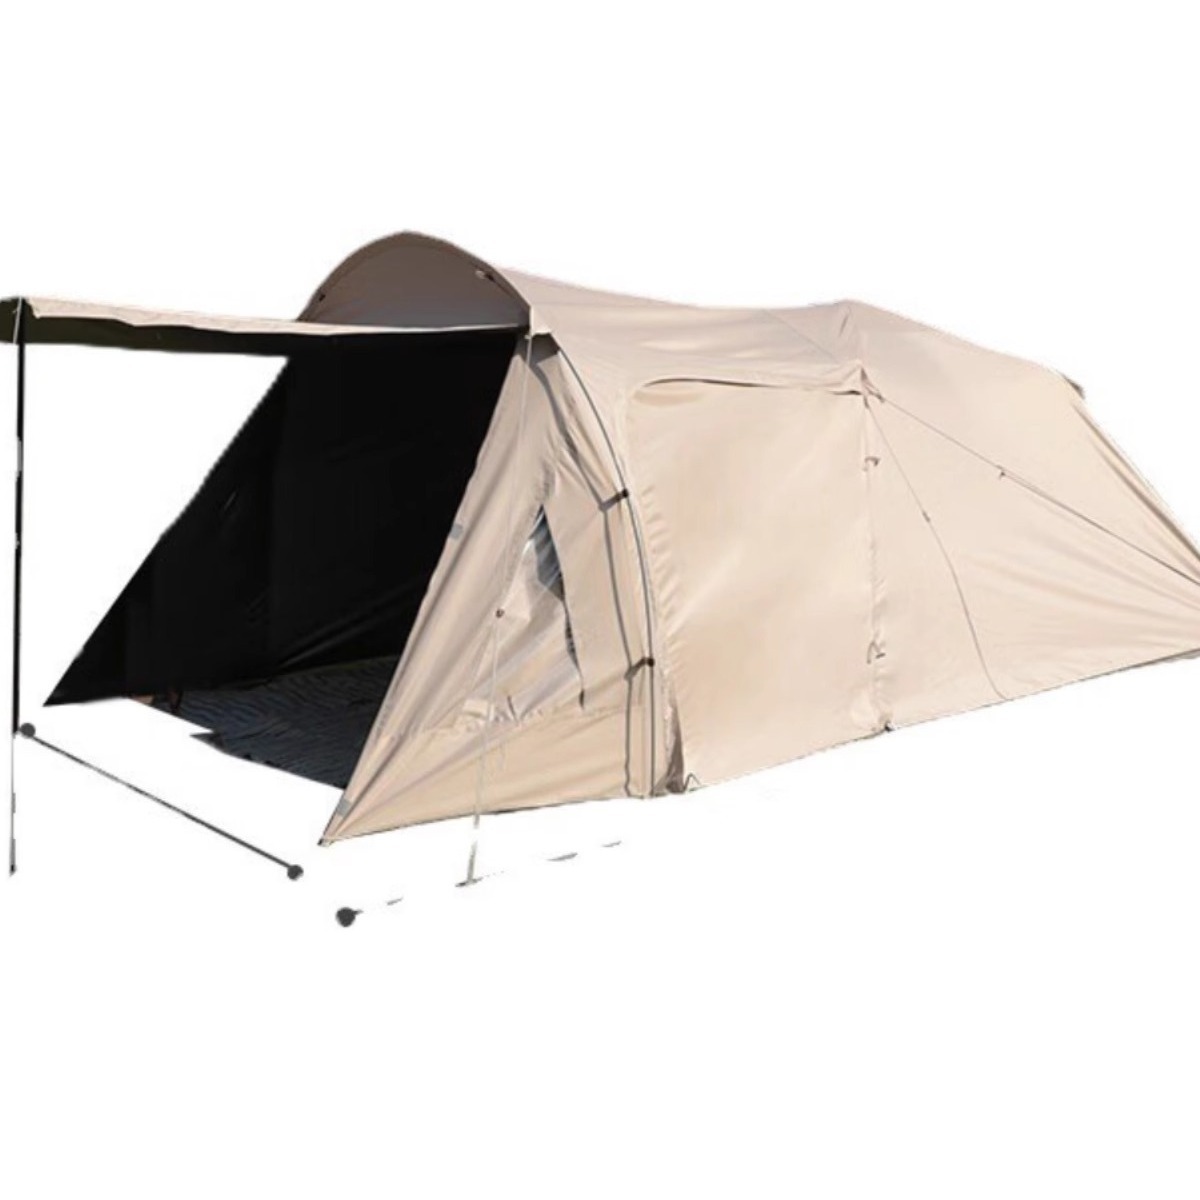 Tunnel Account Outer Tent Camping Supplies Equipment Portable Folding Rain-Proof Thickened Camping Outdoor Two-Bedroom and One Living Room